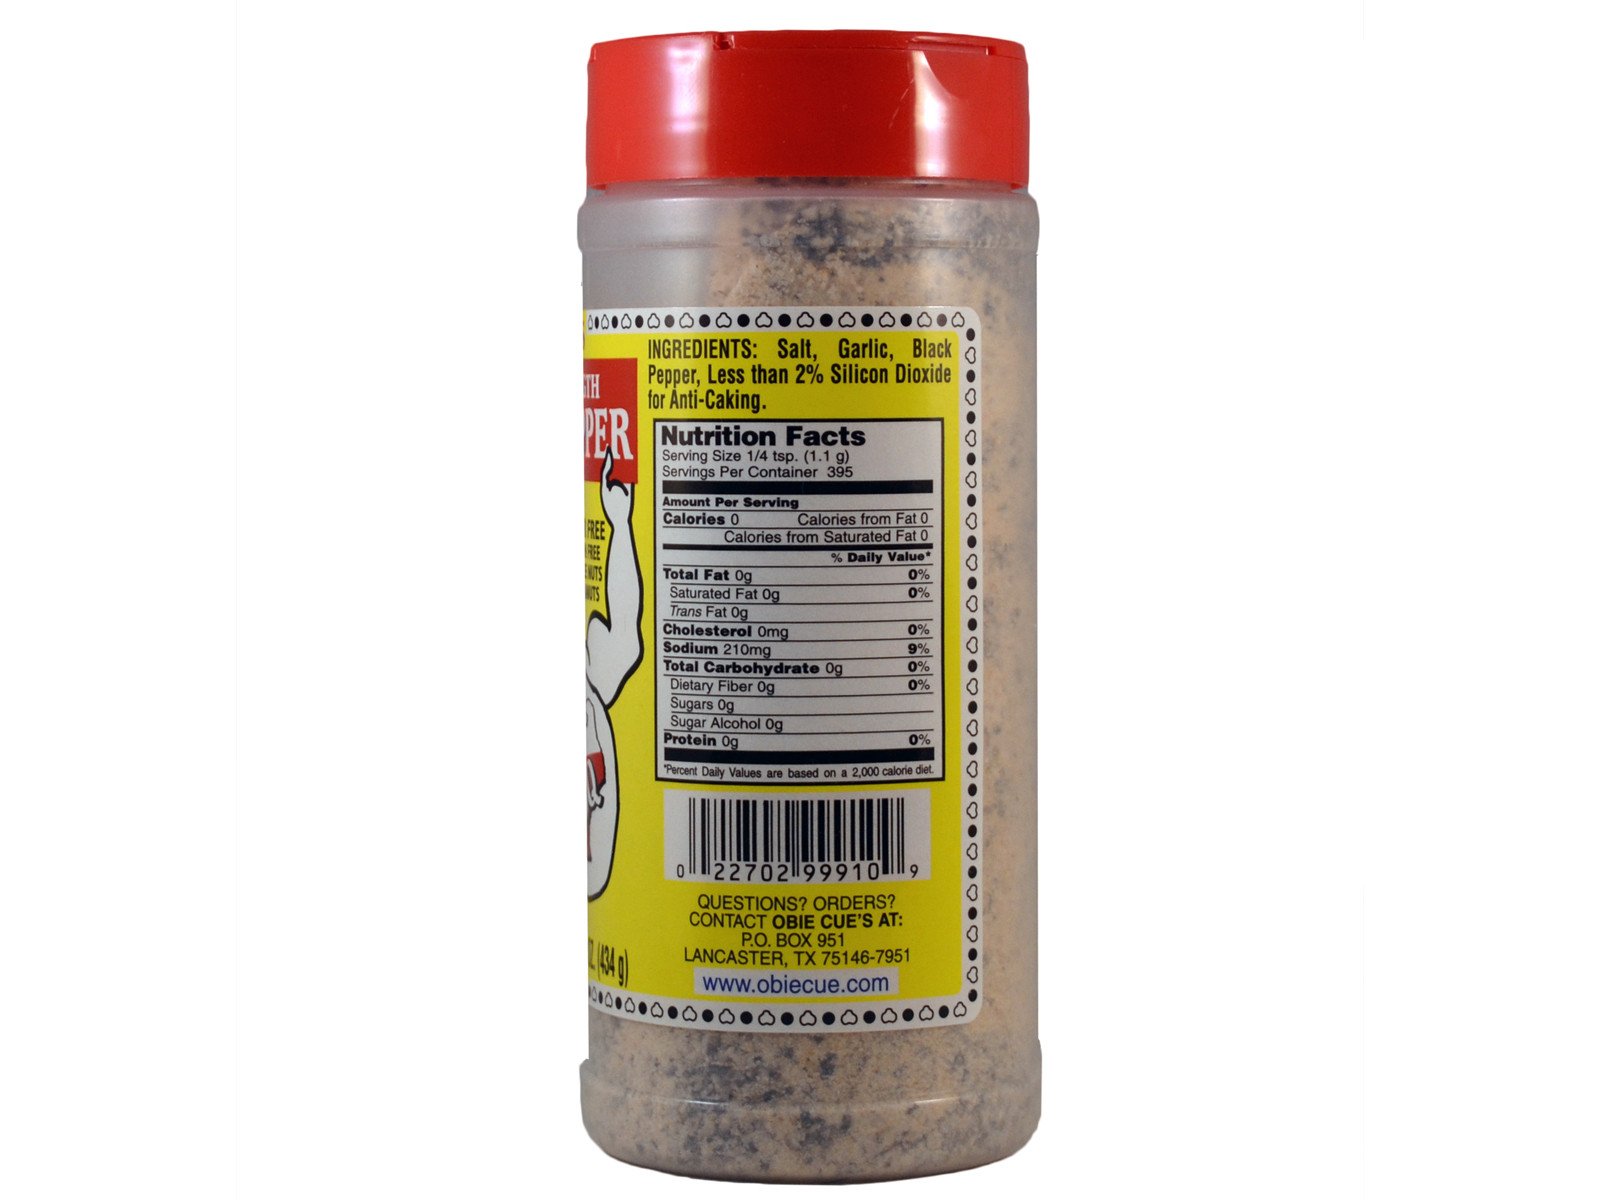 Back view of Obie-Cue's Double Strength Garlic Pepper bottle. The label provides nutritional information and ingredients such as salt, garlic, black pepper, and silicon dioxide. It also states the product is free of gluten, peanuts, and tree nuts.